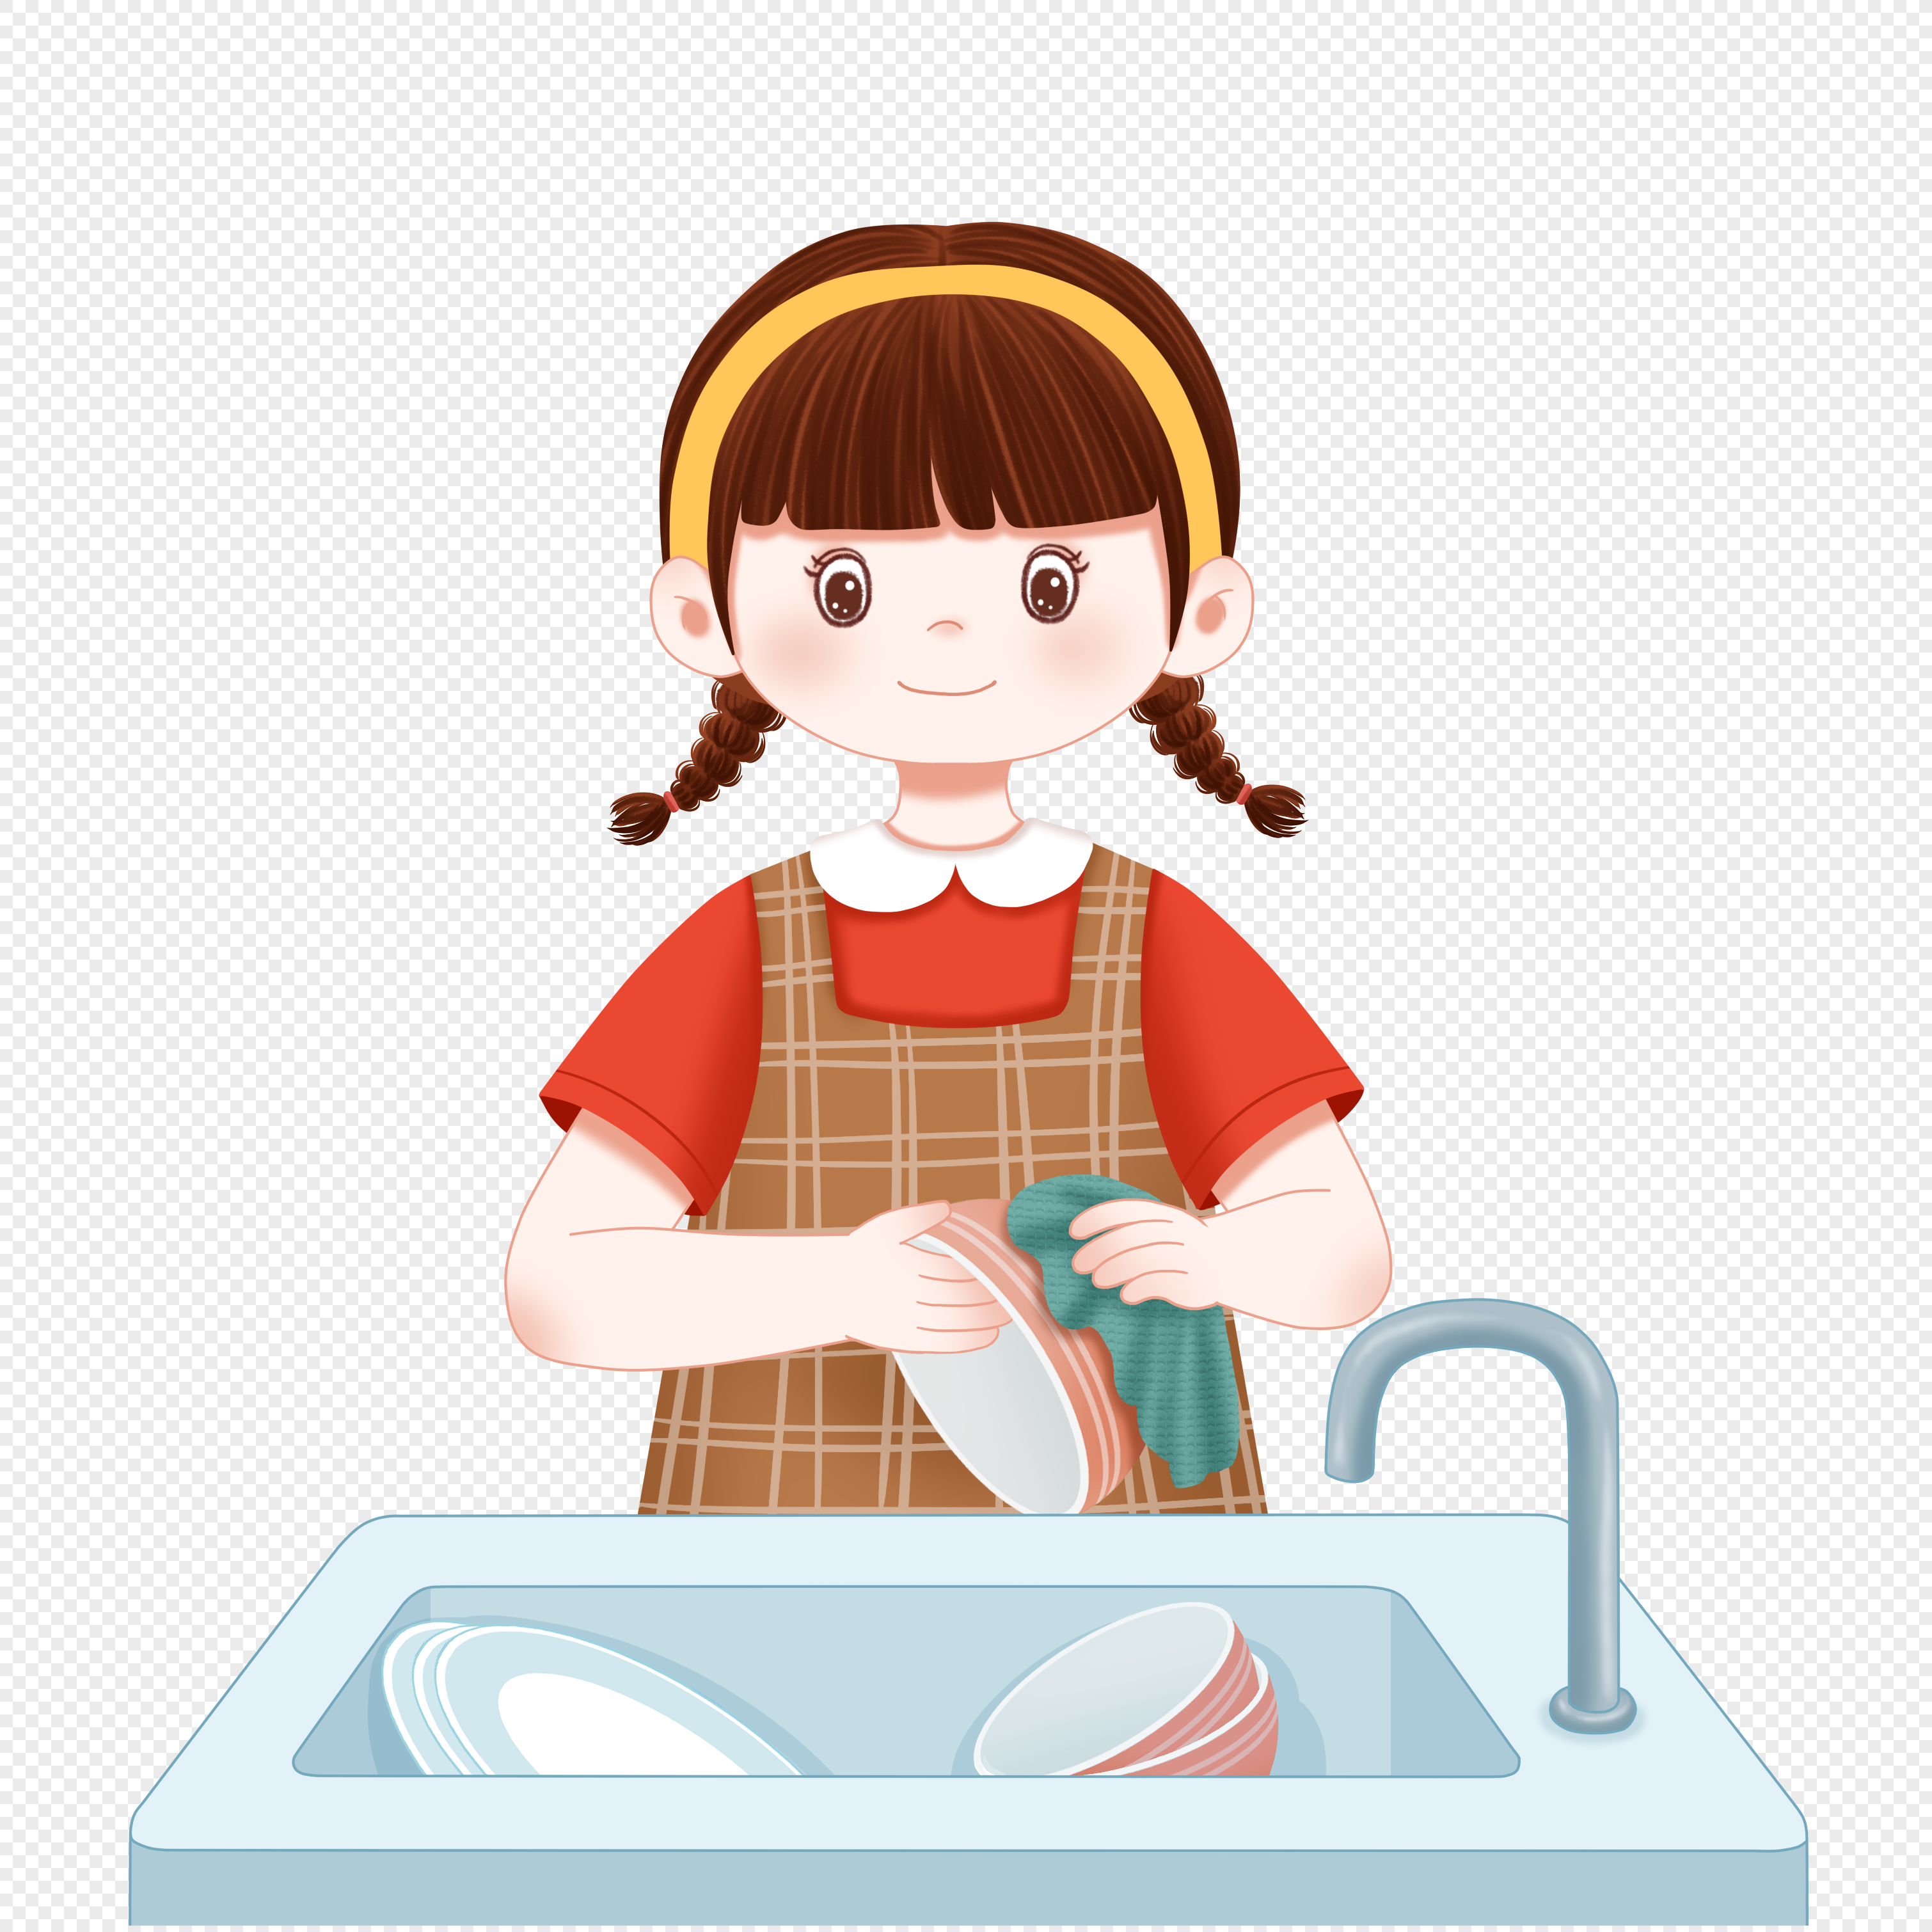 Washing Dishes PNG Transparent Images Free Download, Vector Files